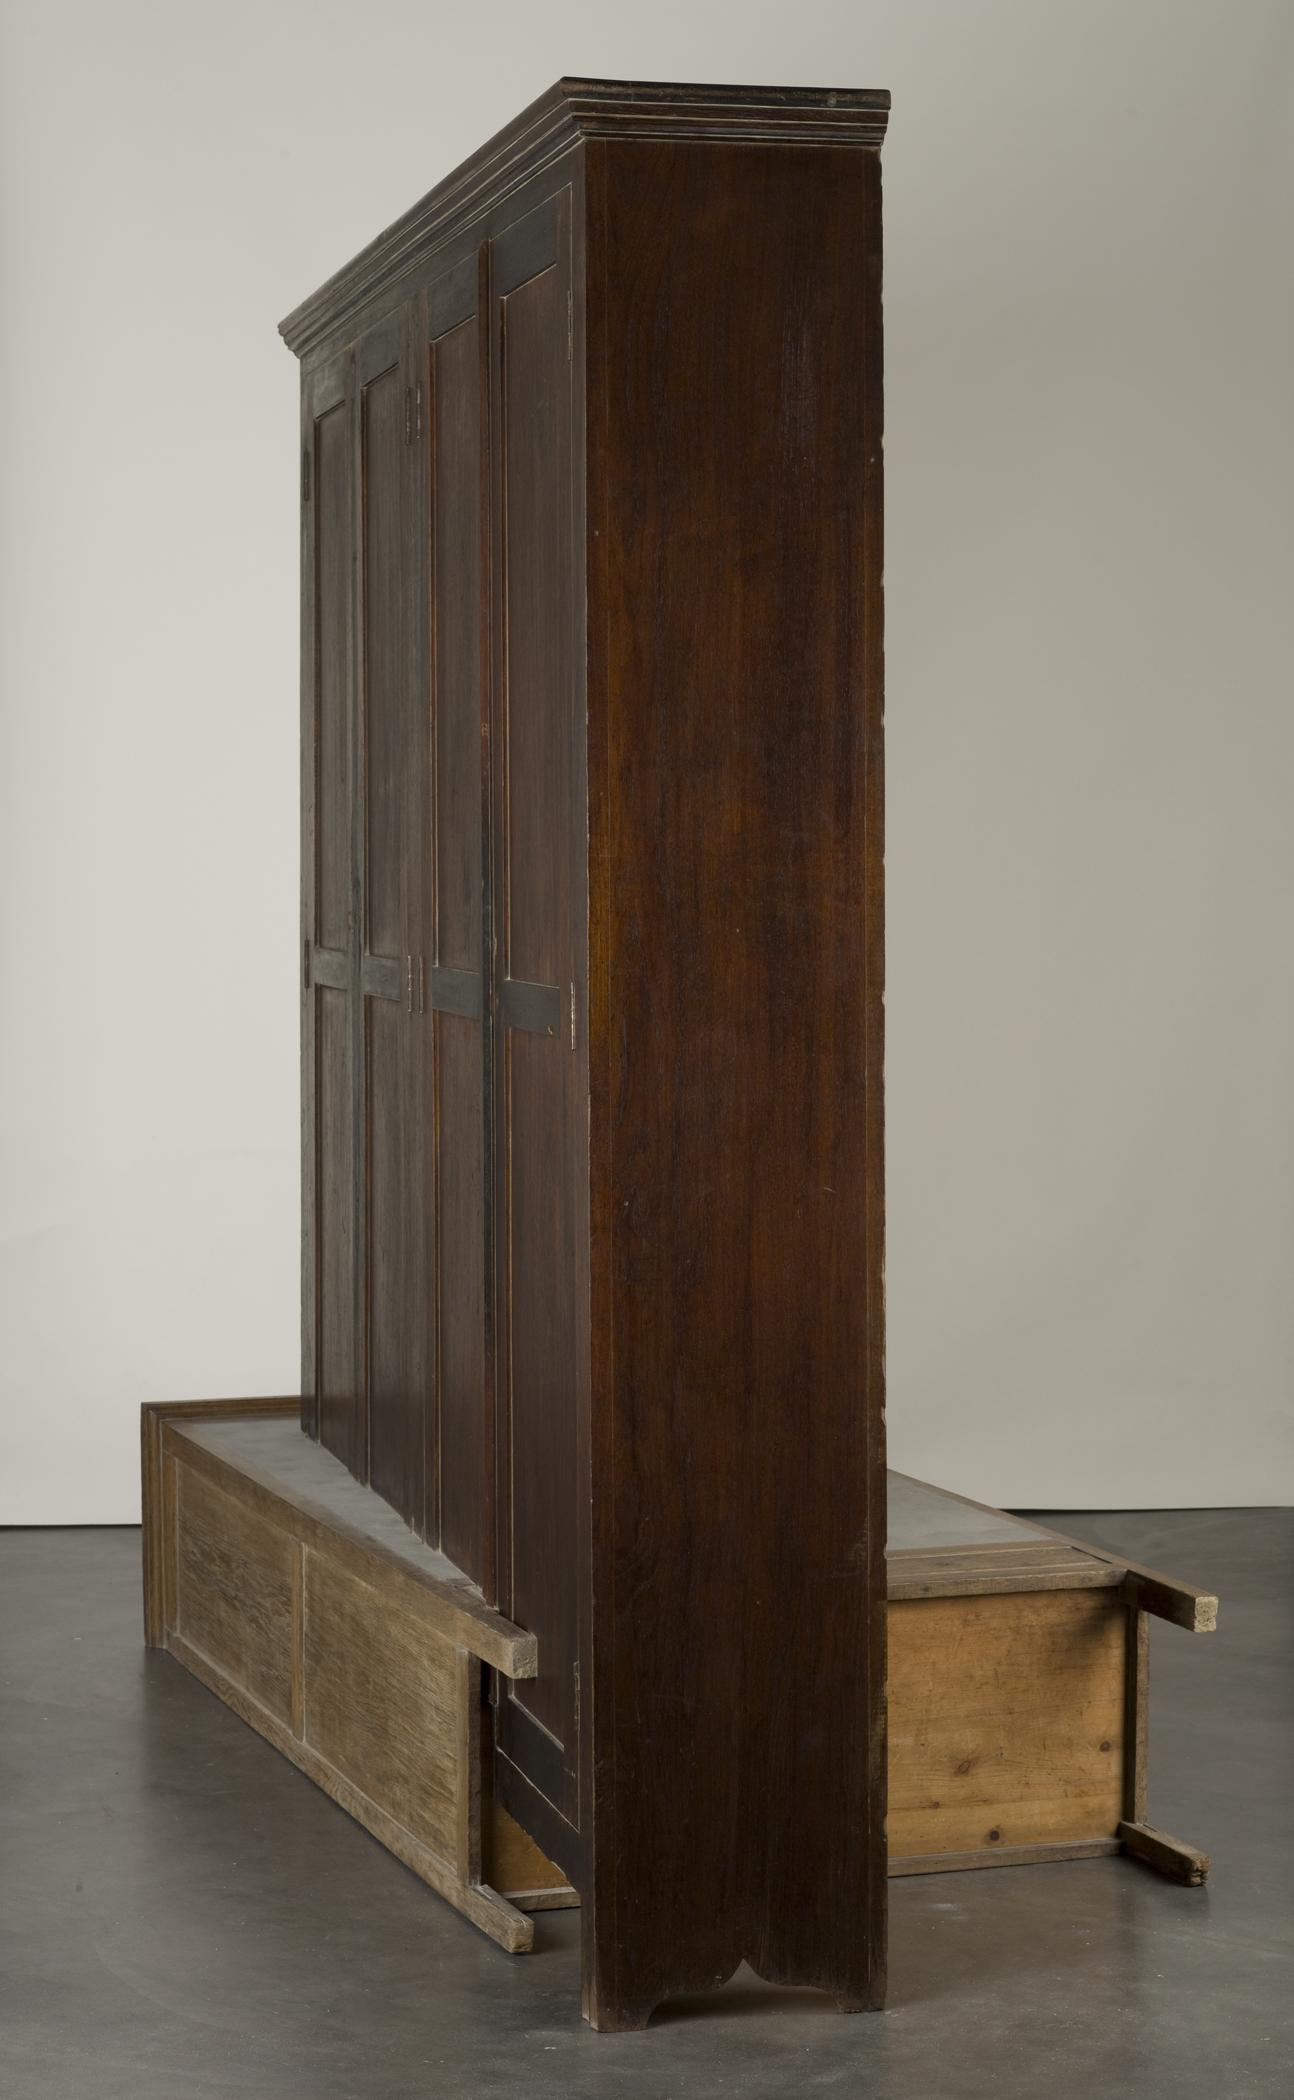 A vertical wooden cabinet precisely intersects a second wooden cabinet laying on the floor.